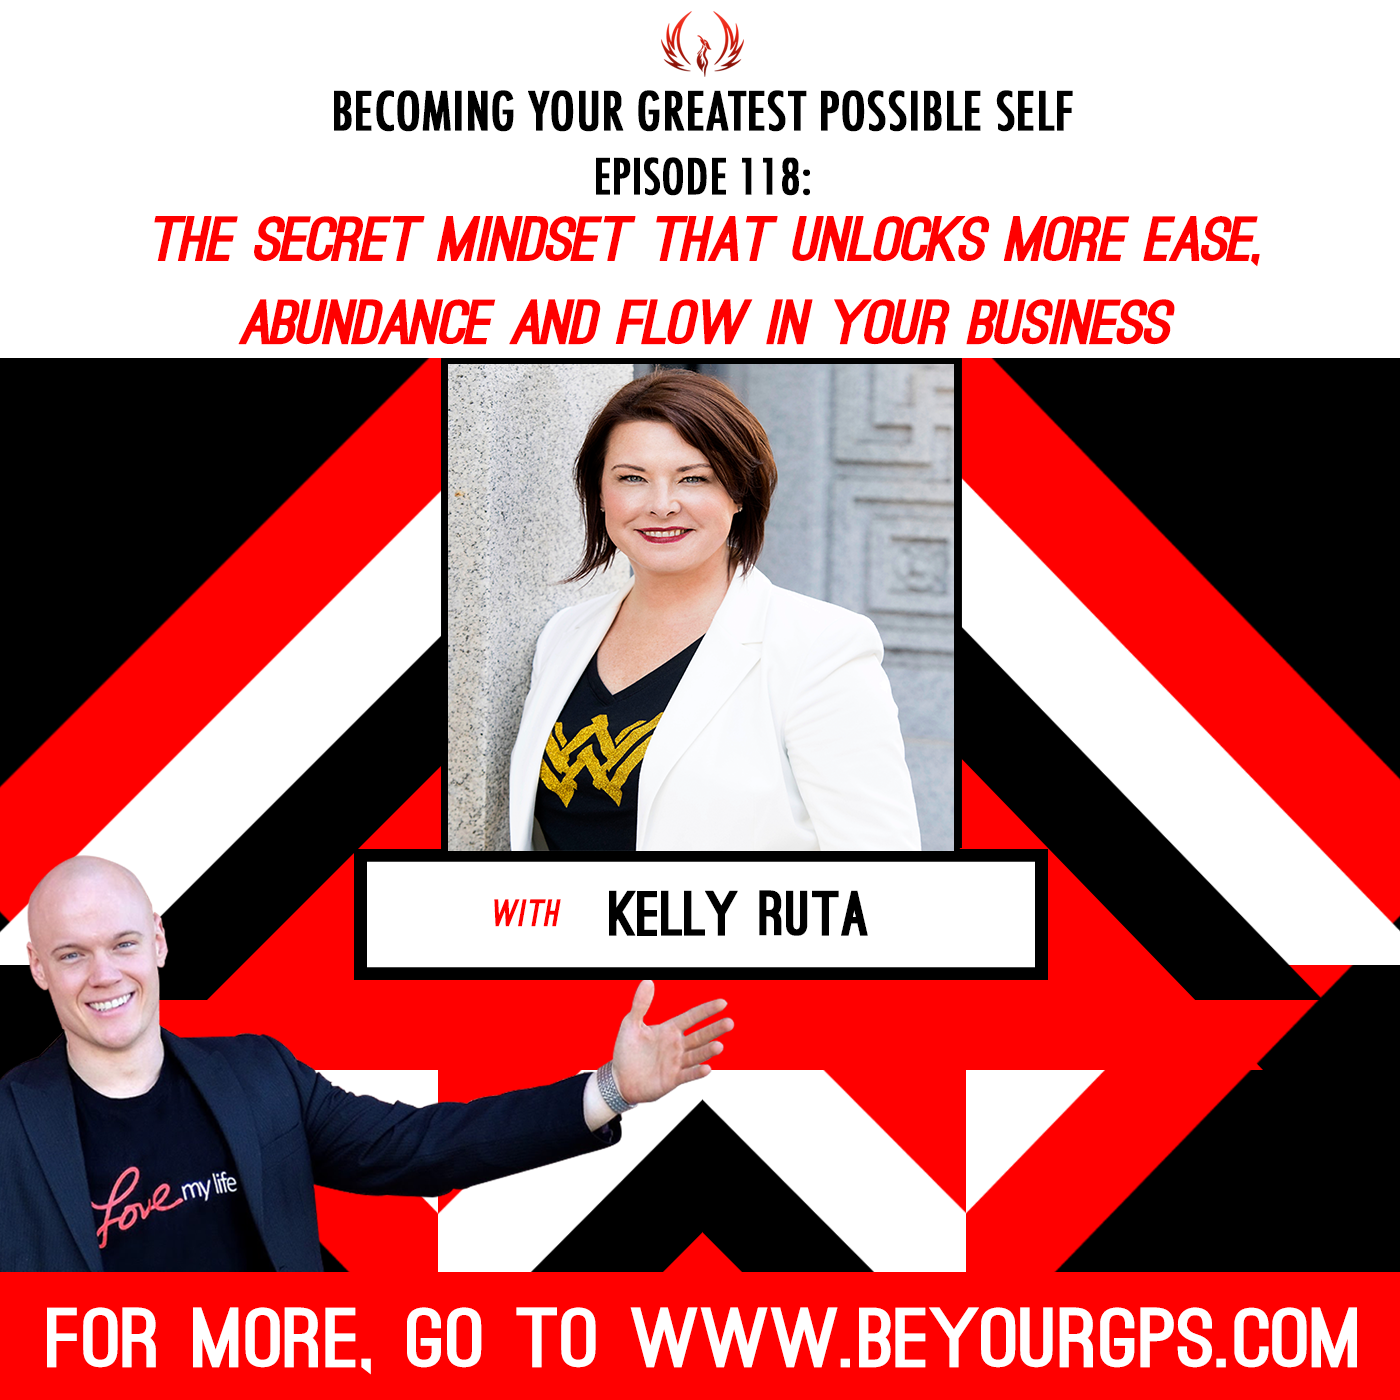 The Secret Mindset That Unlocks More Ease, Abundance & Flow In Your Business with Kelly Ruta